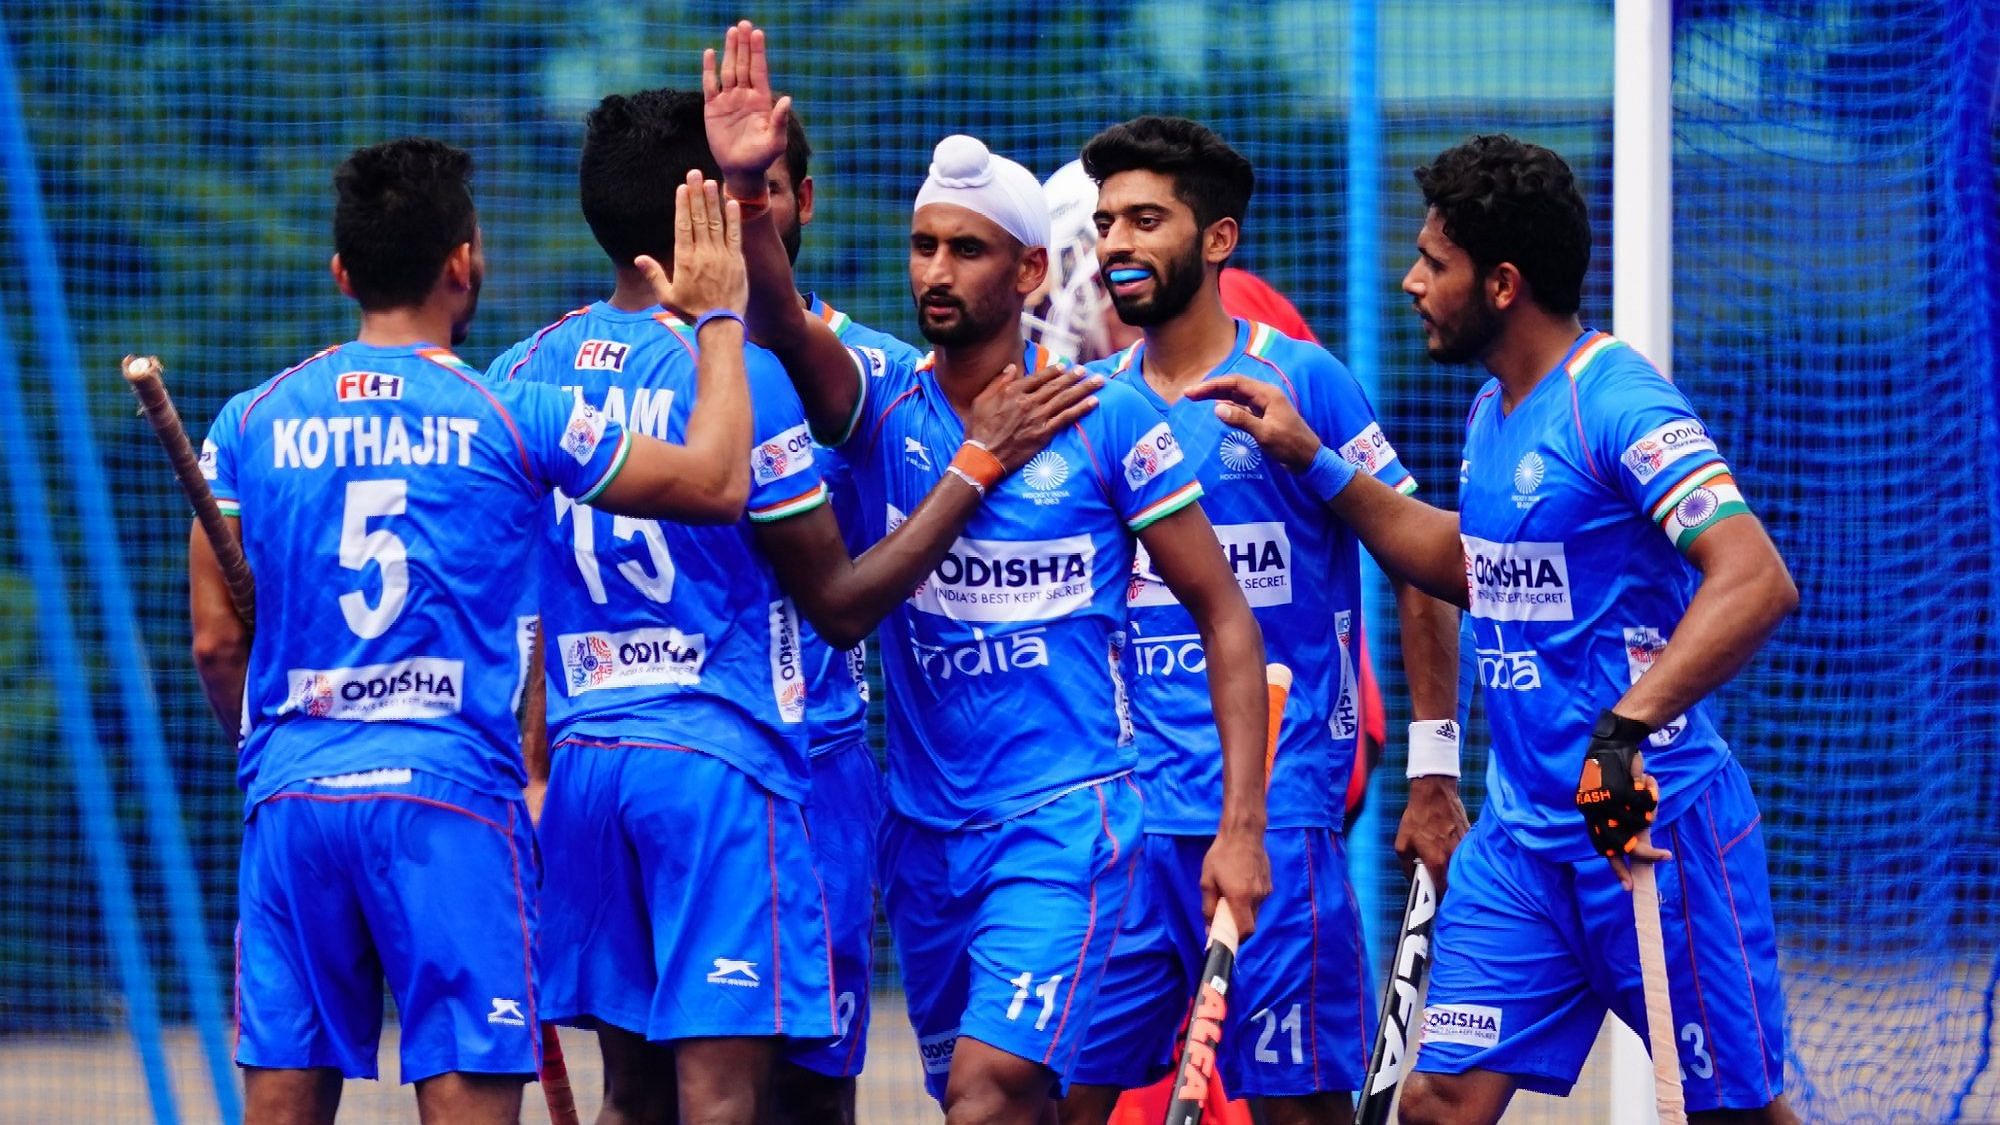 The Indian team celebrating one of their goals against New Zealand in the final.